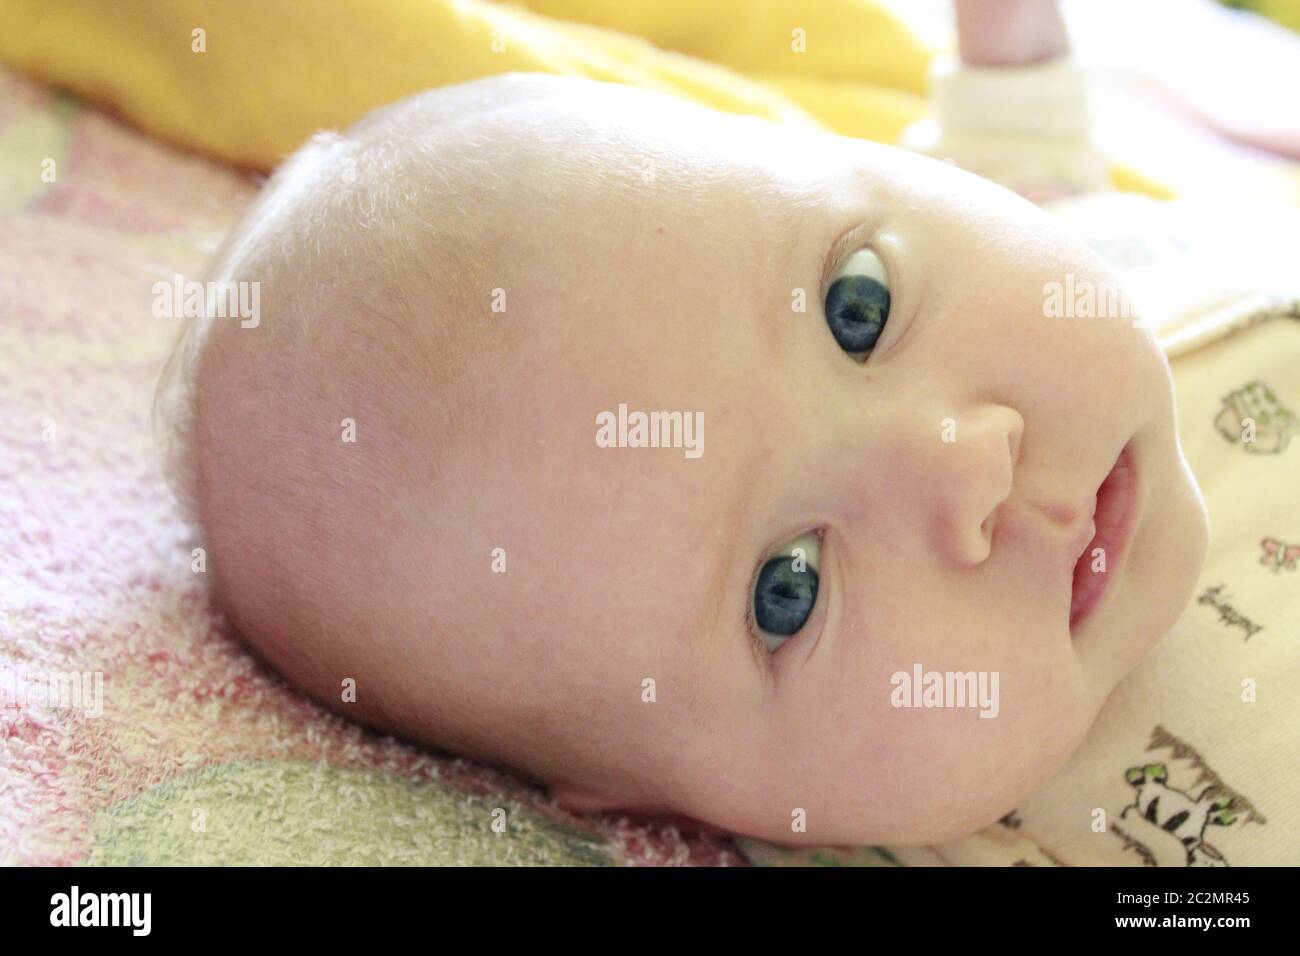 Portrait of smiling baby with blue eyes. Newborn child looking at mother Stock Photo